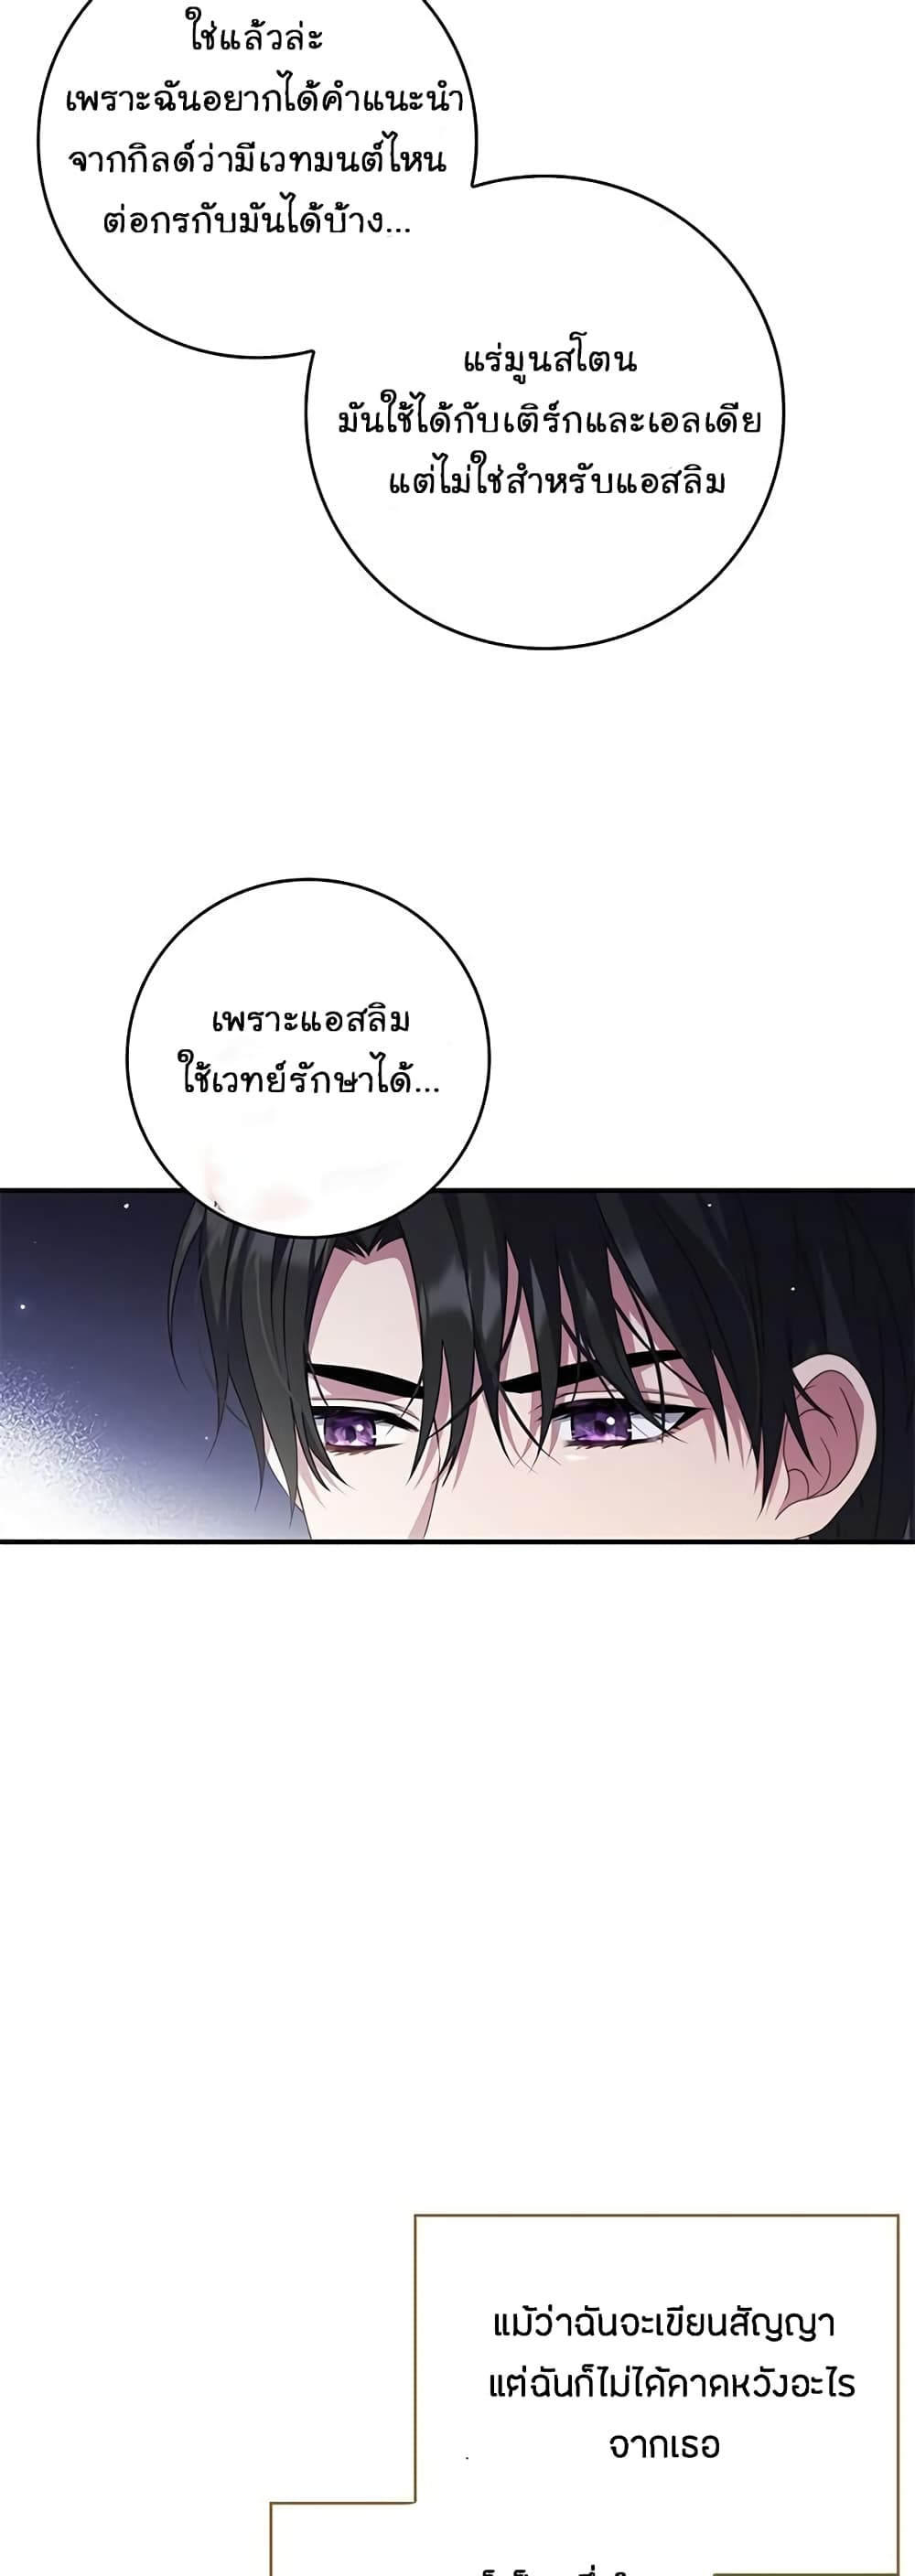 Fakes Don’t Want To Be Real ตอนที่ 9 (15)